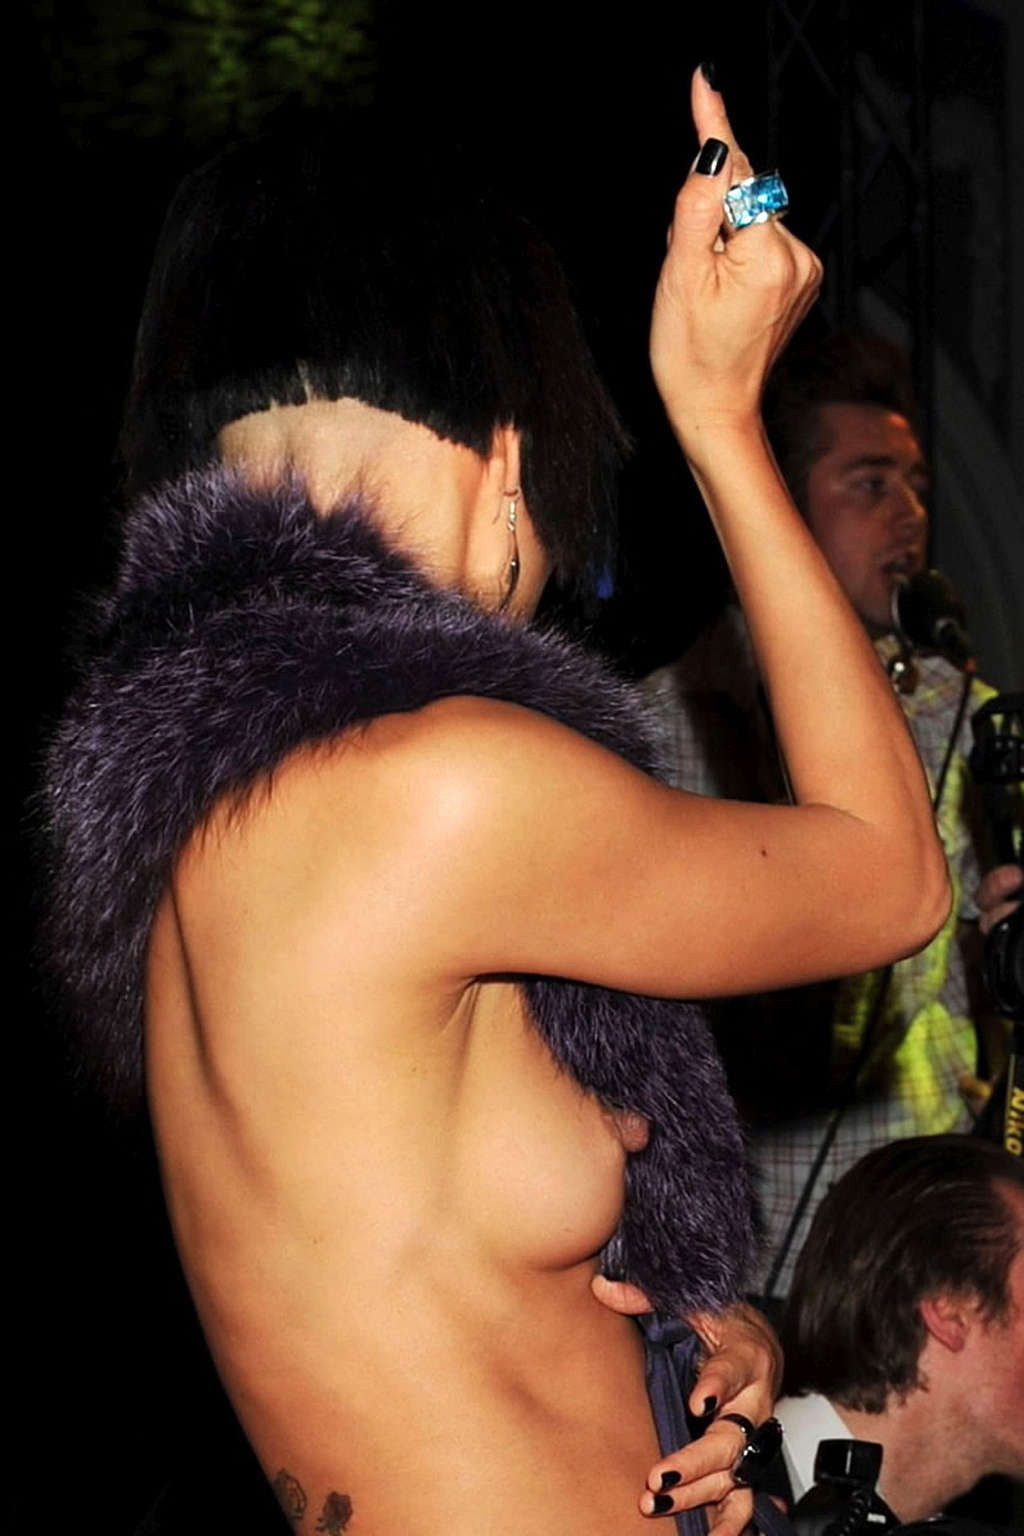 Bai Ling has a nipple slip while she is performing her show #75369747